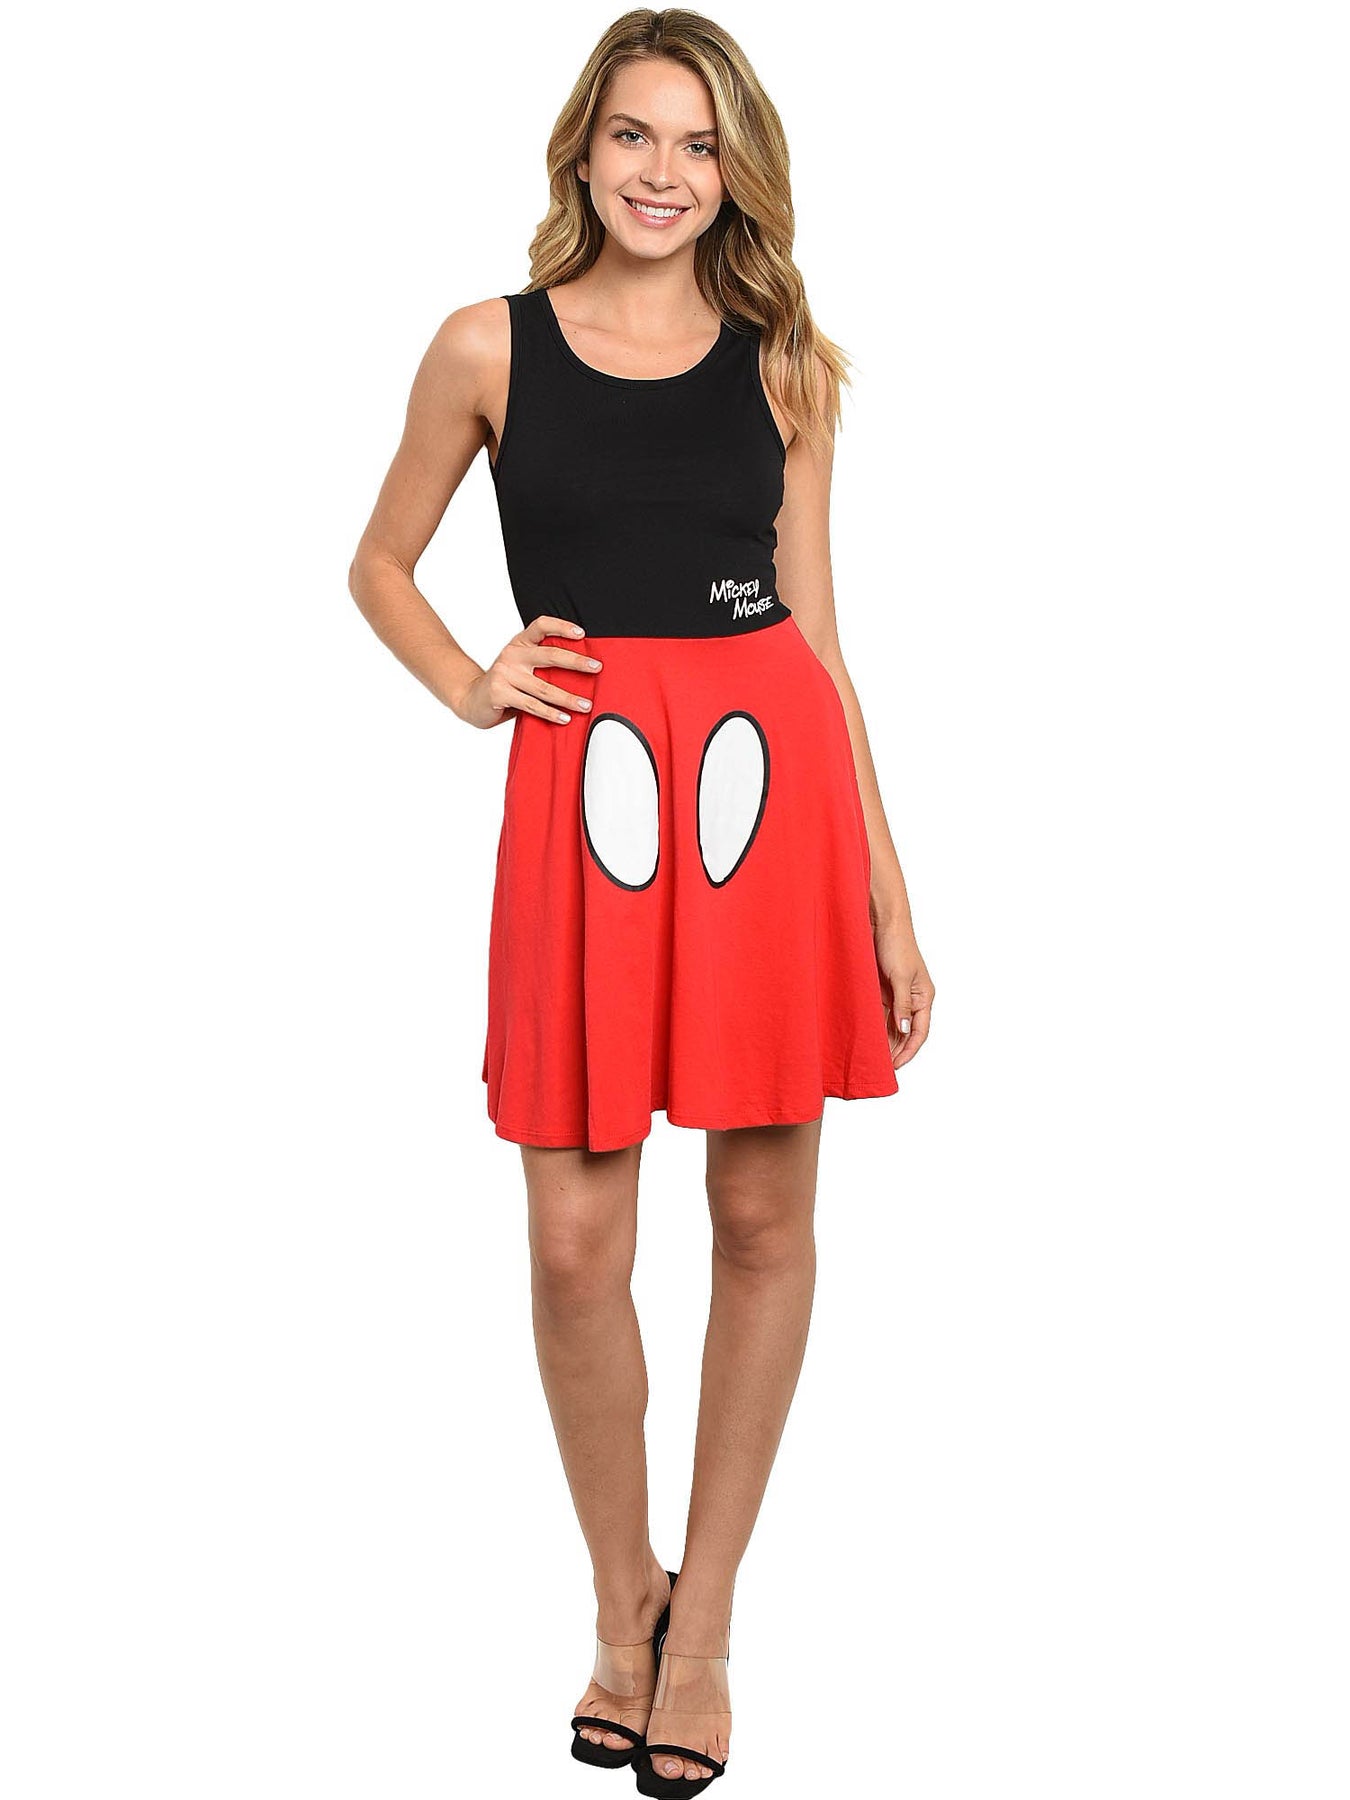 Buy Mickey Mouse Dress, Minnie Mouse Dress, Mickey Dress, Minnie Dress,  Goofy Dress, Minnie Birthday Dress Online in India - Etsy